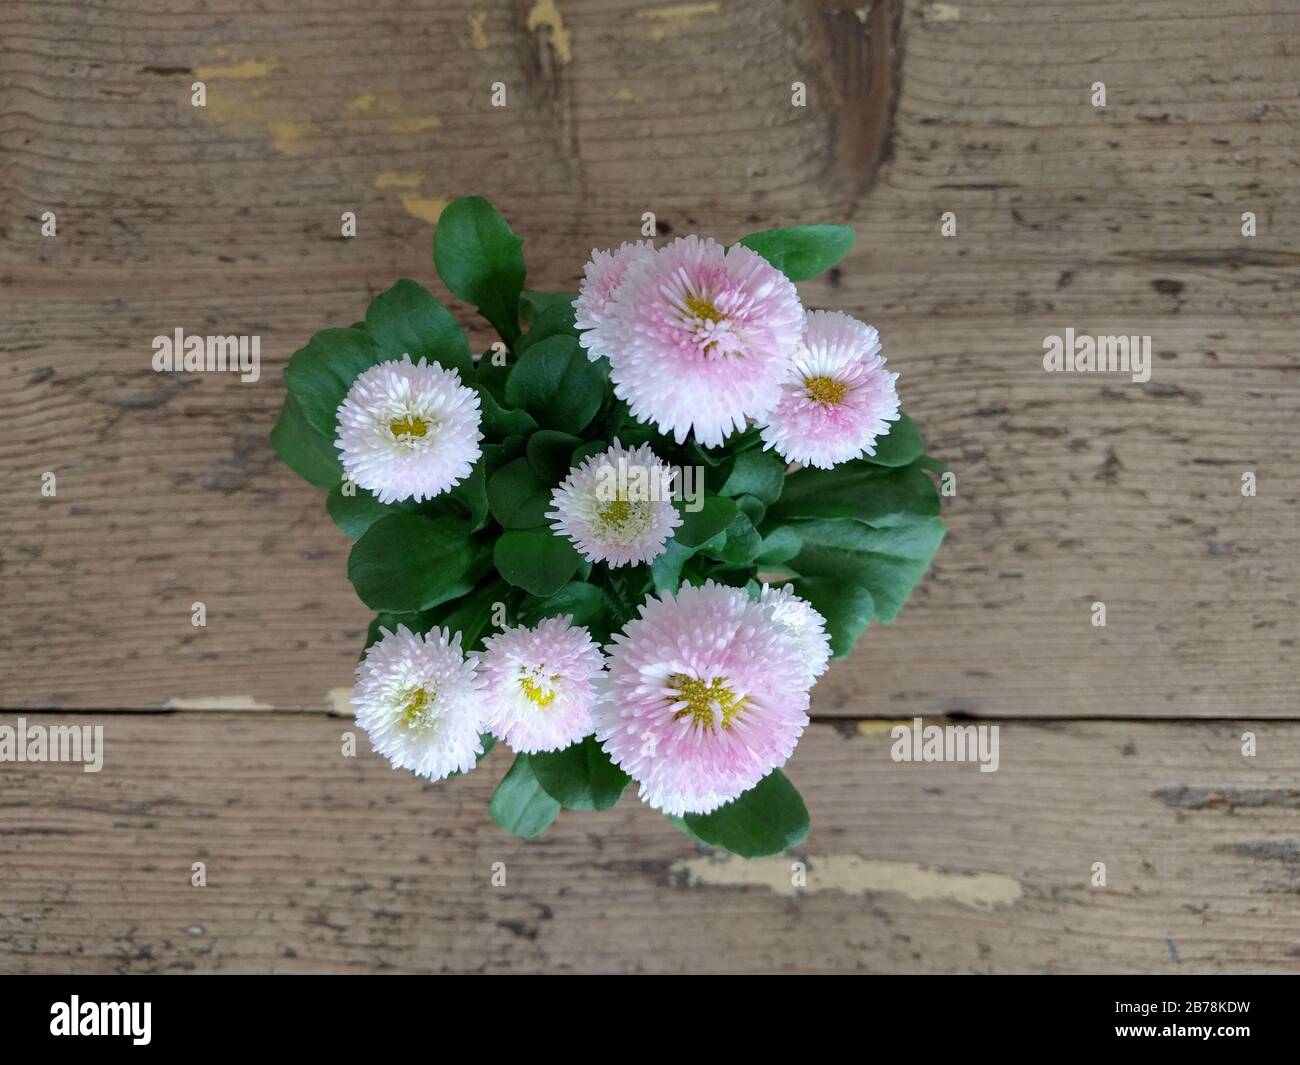 Daisy pomponette plant, pink and white flowers Stock Photo